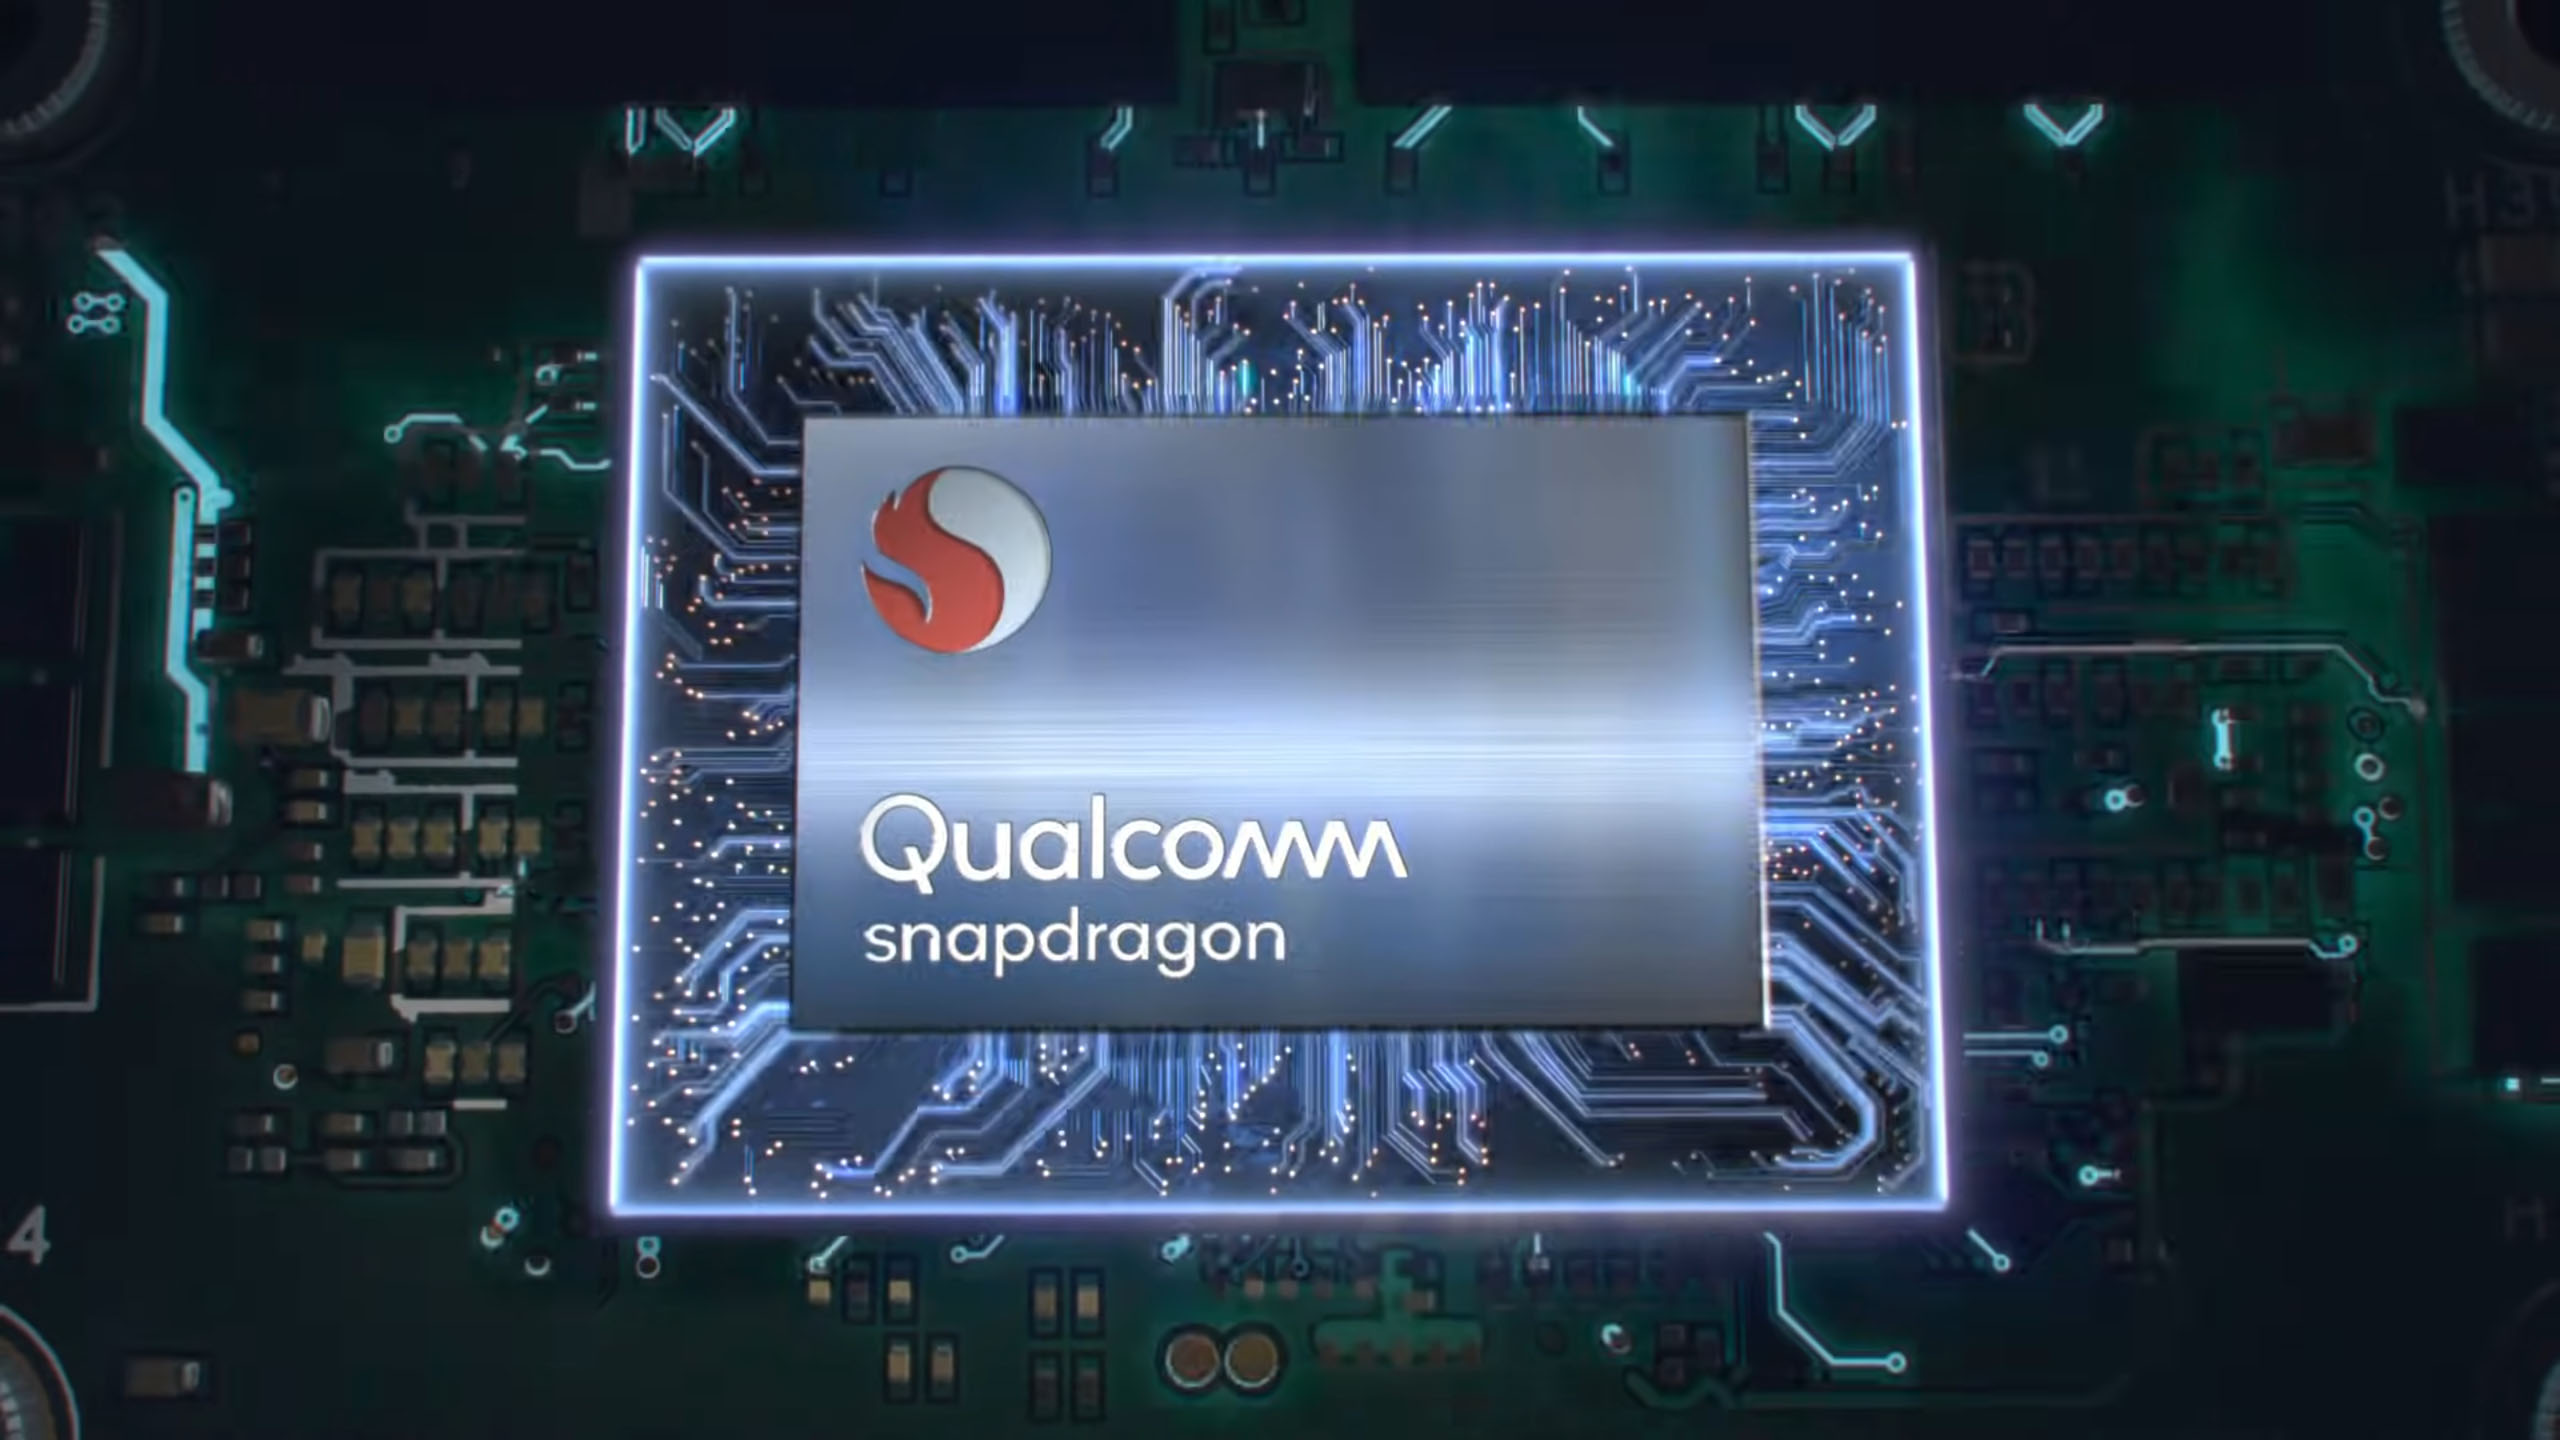 You may soon be waiting longer and paying more for Snapdragon-powered phones